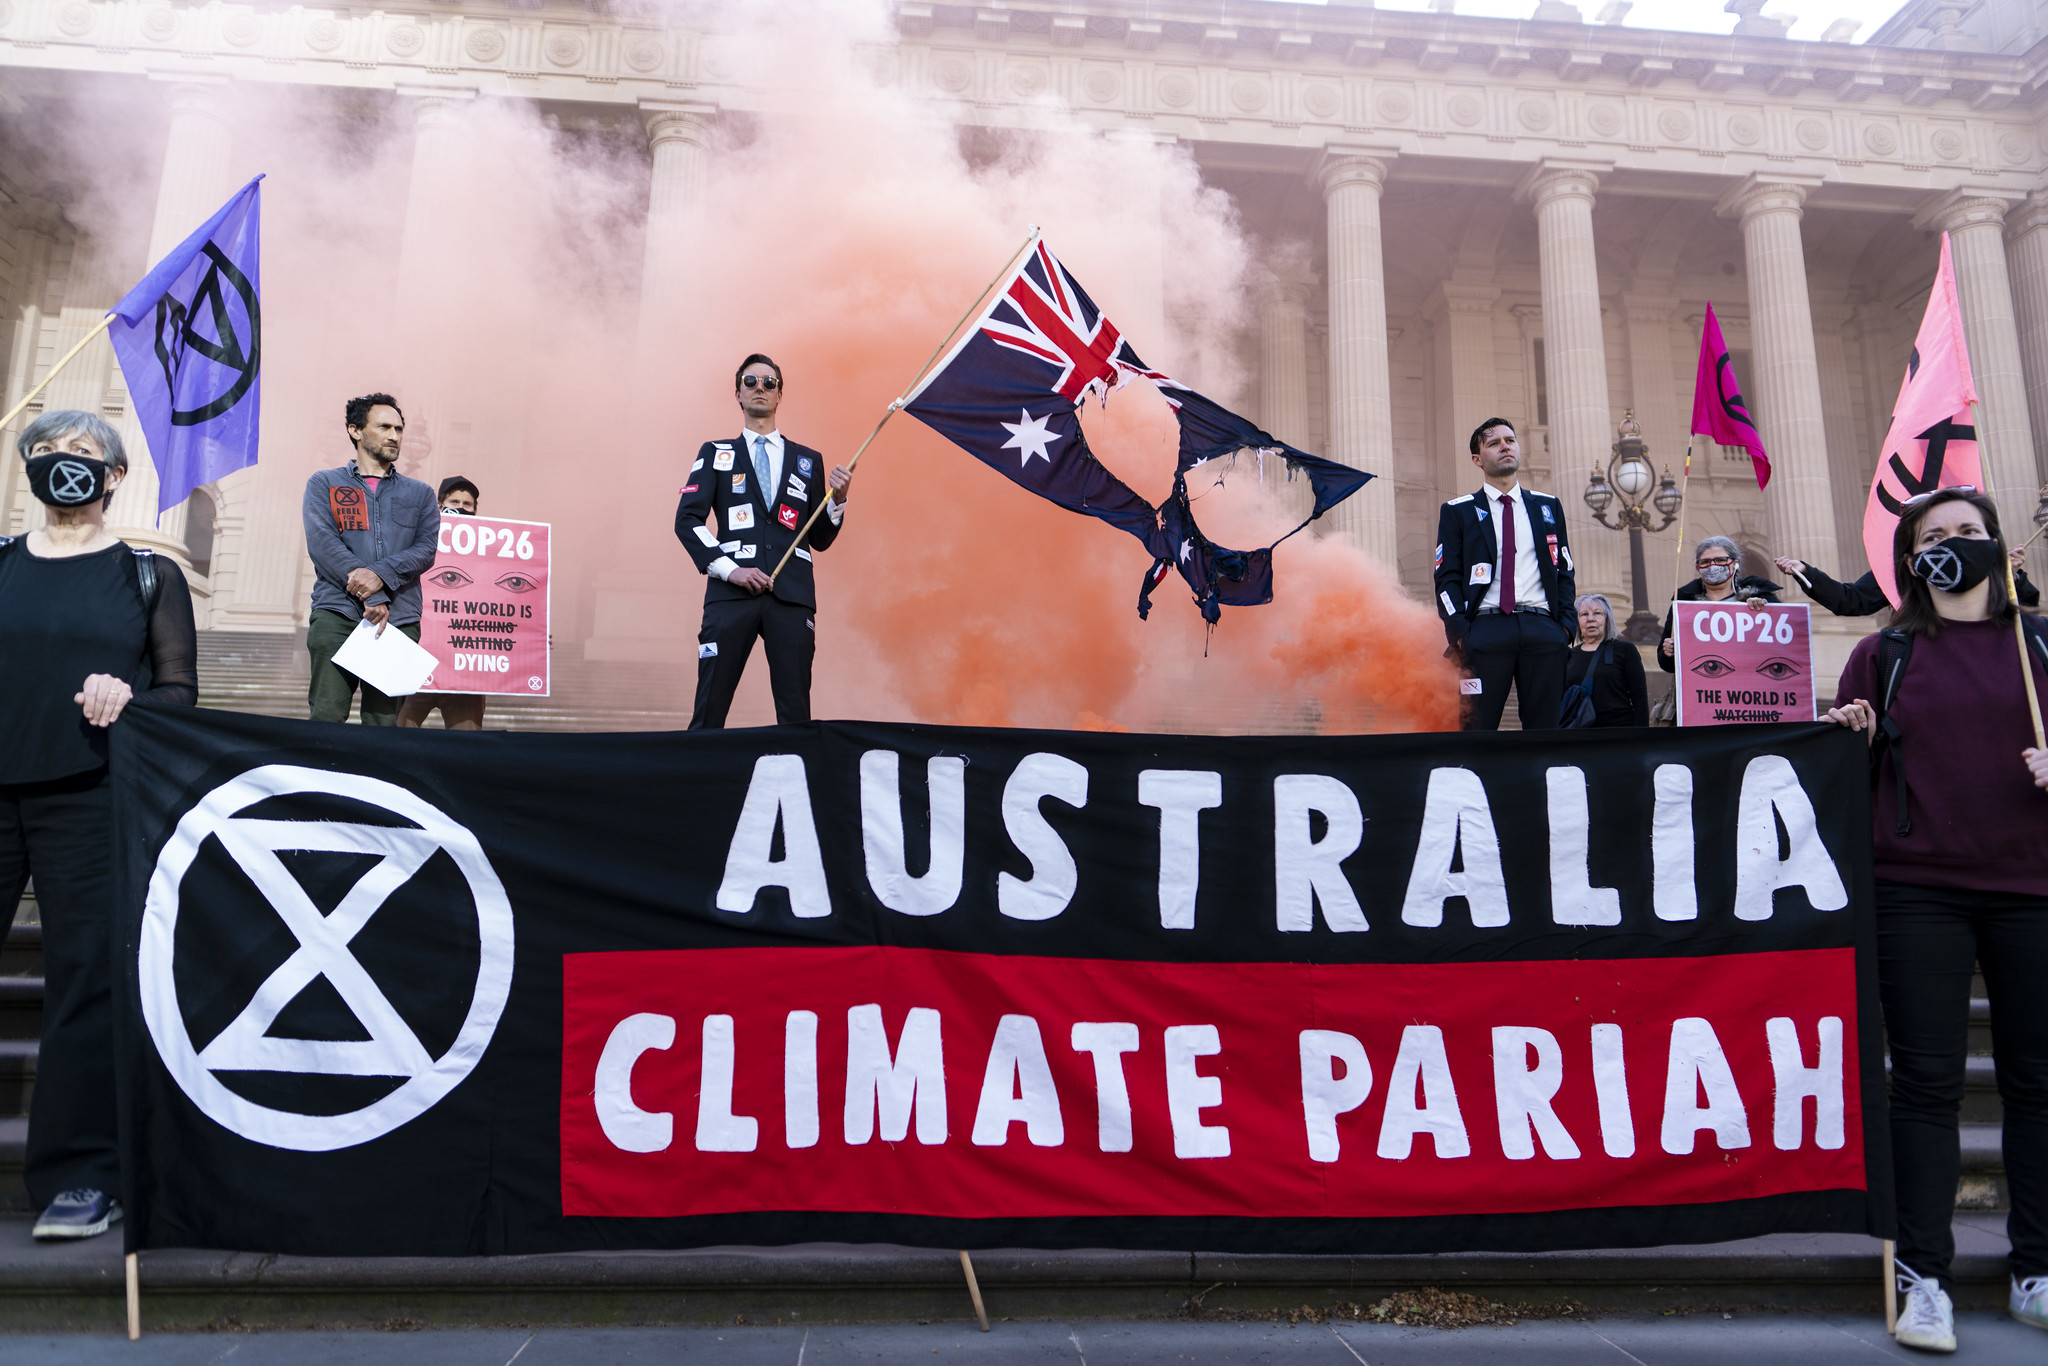 A photograph of a group of Extinction Rebellion activists on Parliament House steps in Melbourne. Two stand at the bottom holding a large banner bearing the XR symbol and which reads "Australia, Climate Pariah". Two men in suits covered with stickers from extractive industries companies stand behind the banner, and one is holding an Australian flag with holes burned in it. Others stand on the steps holding signs and XR flags. Orange smoke fills the background.